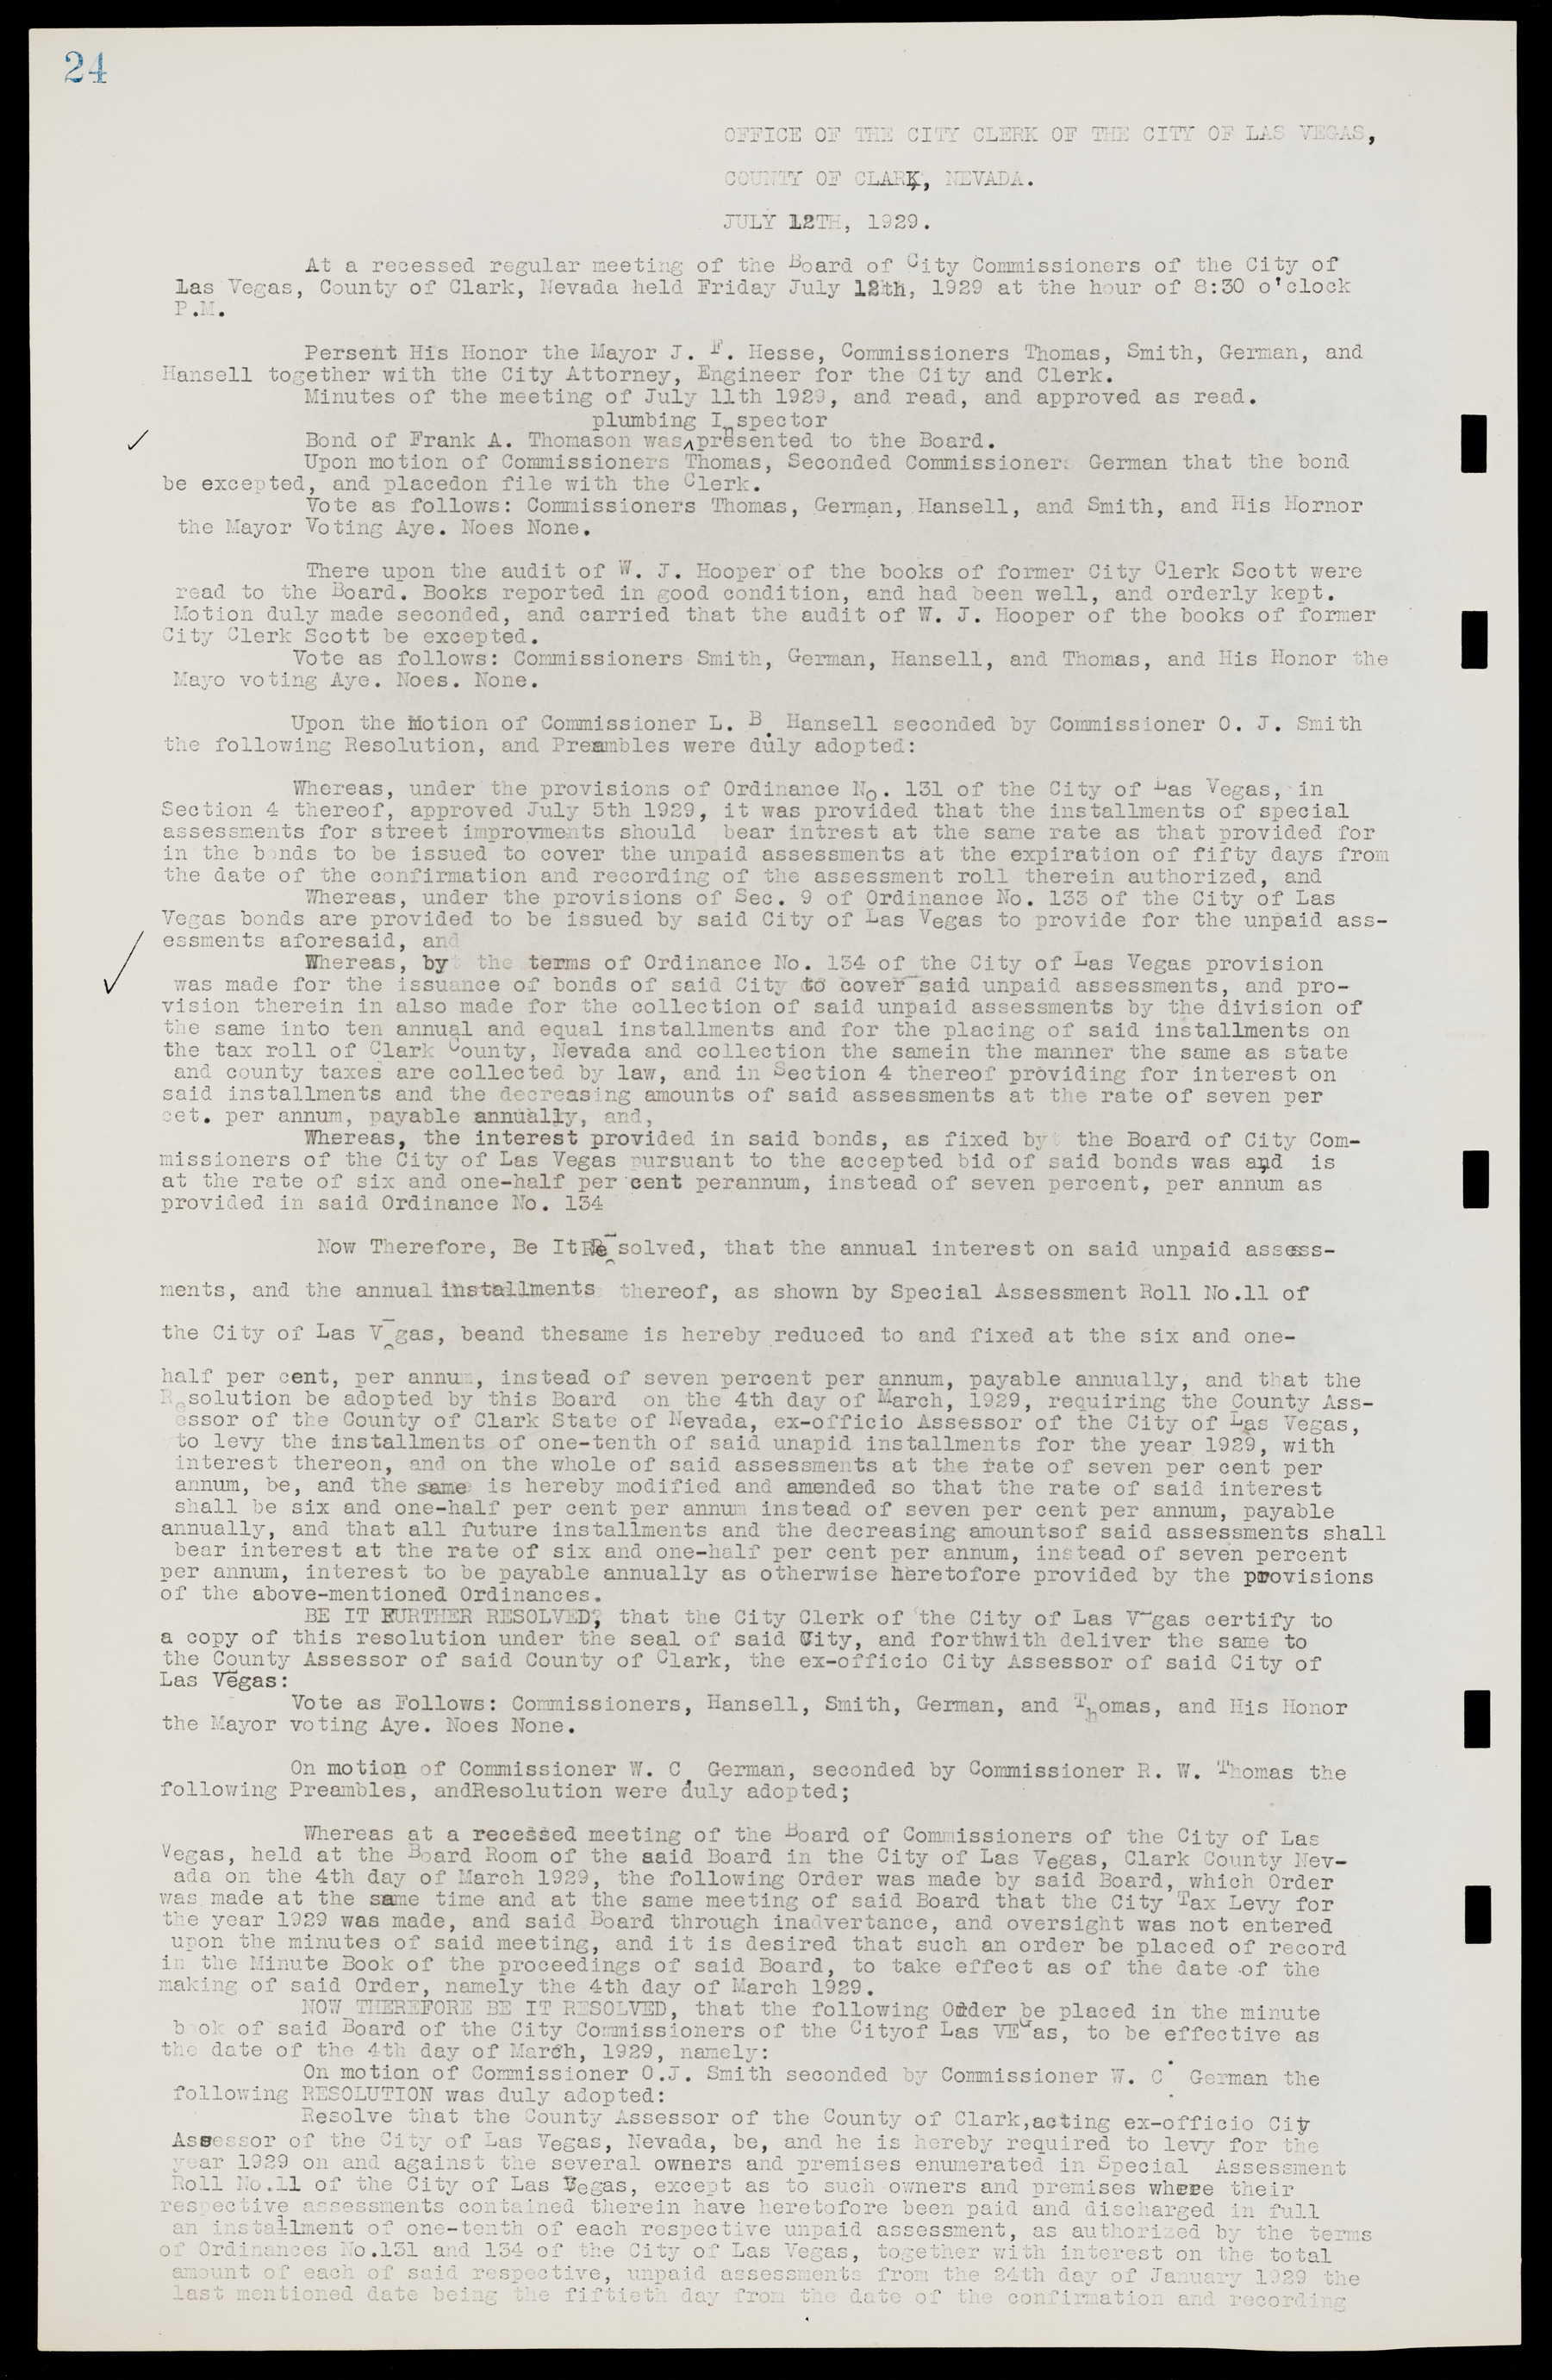 Las Vegas City Commission Minutes, May 14, 1929 to February 11, 1937, lvc000003-30